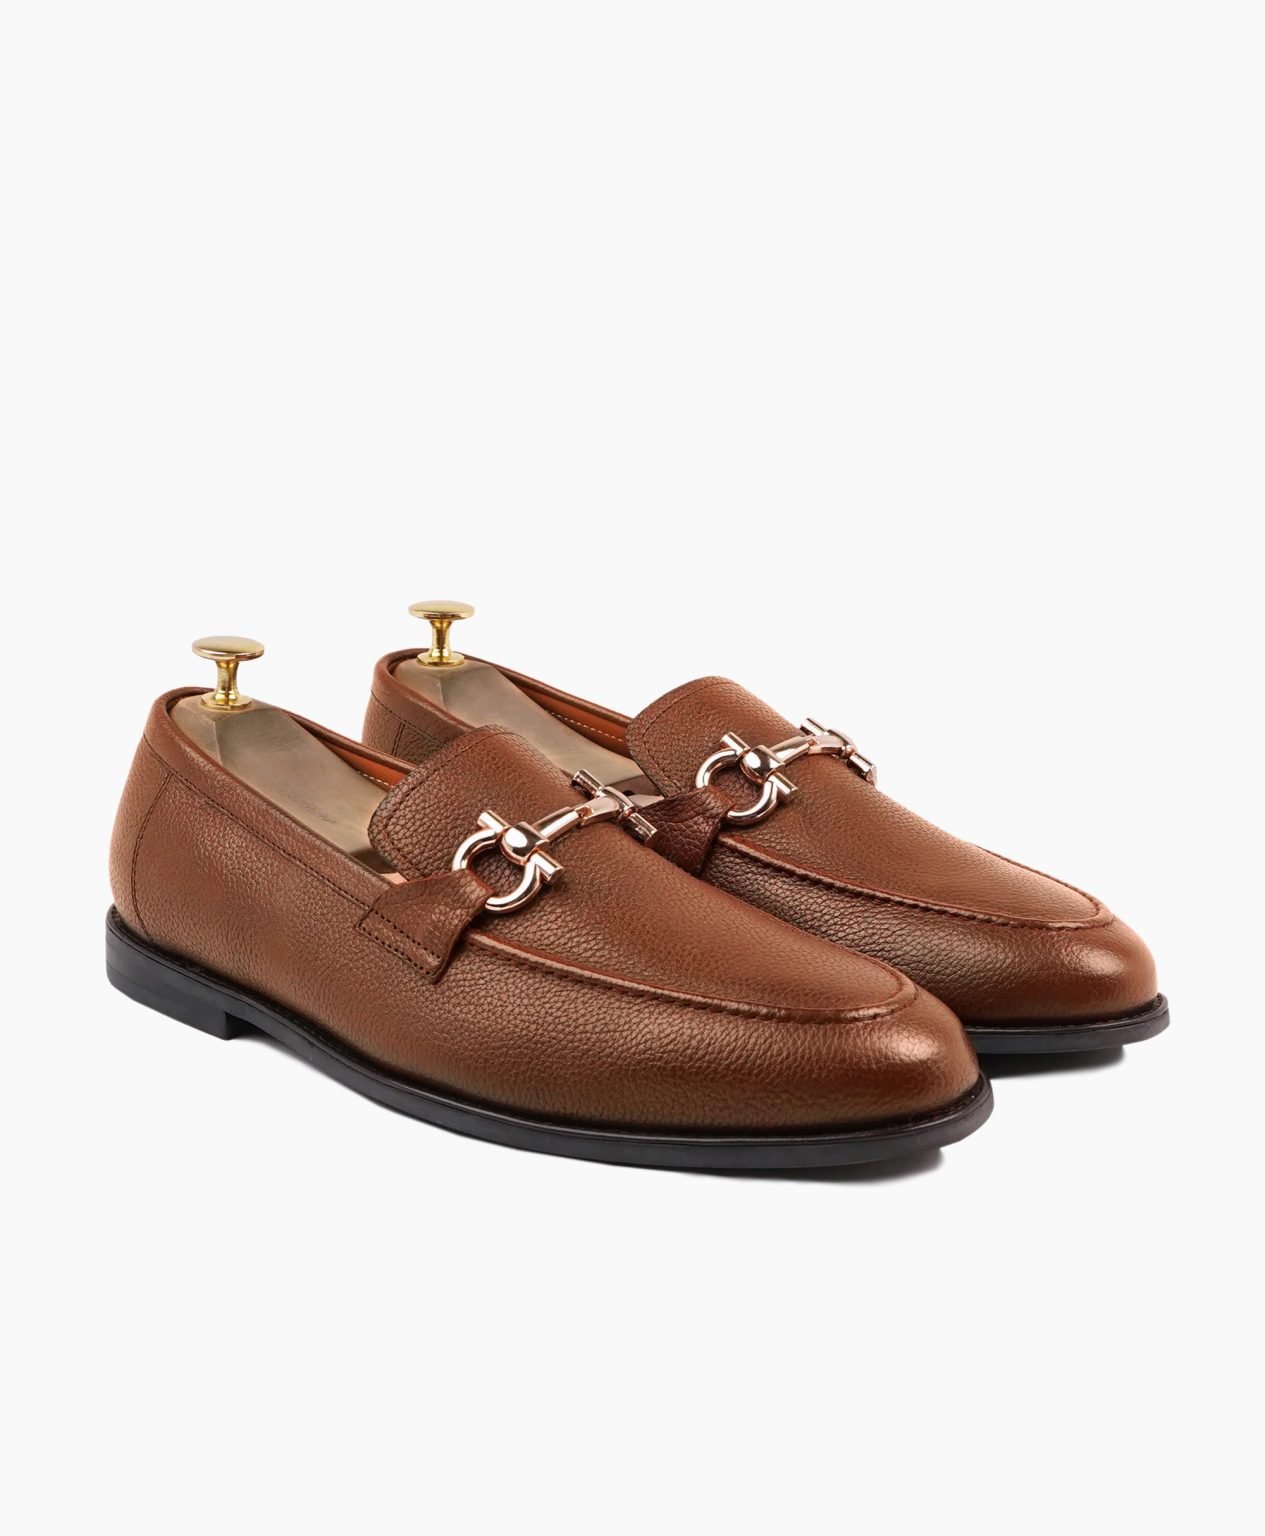 axminster-tan-leather-loafers-image200